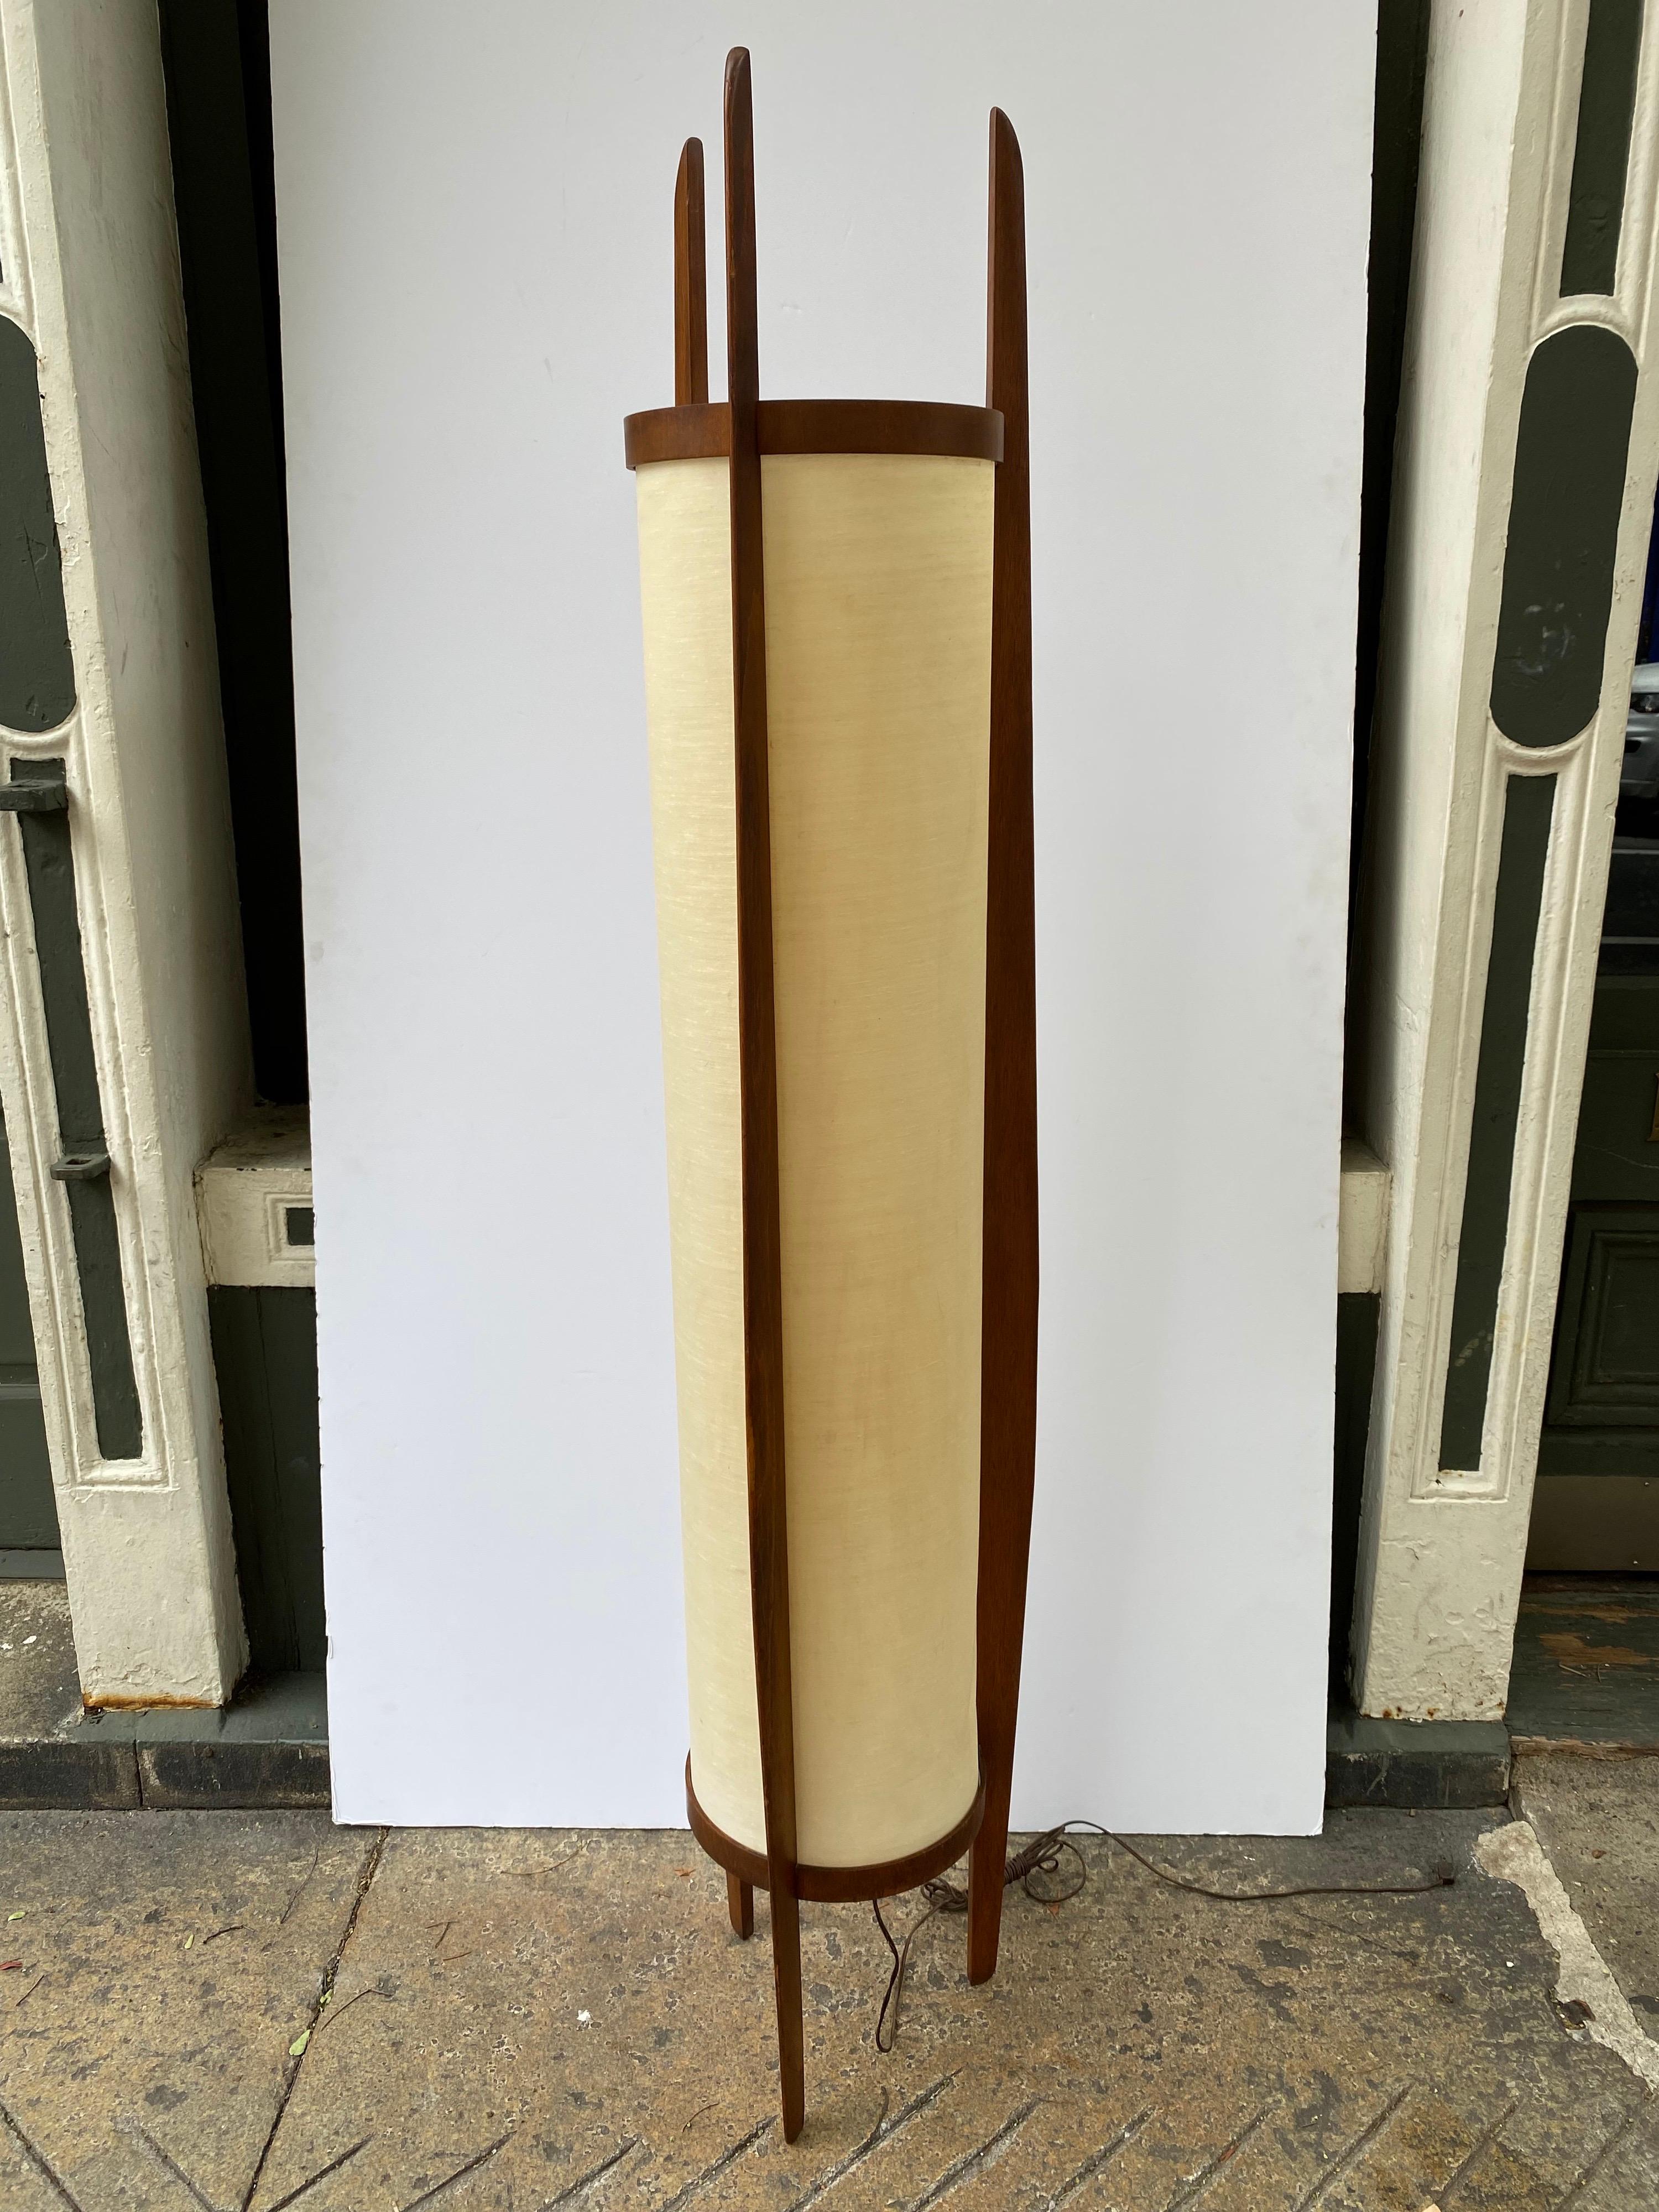 Very original Modeline floor lamp. 3 Walnut Legs support a cylinder lamp shade. Substantial size and scale. Switch that controls either top or bottom bulb or both! When turned on Shade looks great, when turned off there are several spots showing